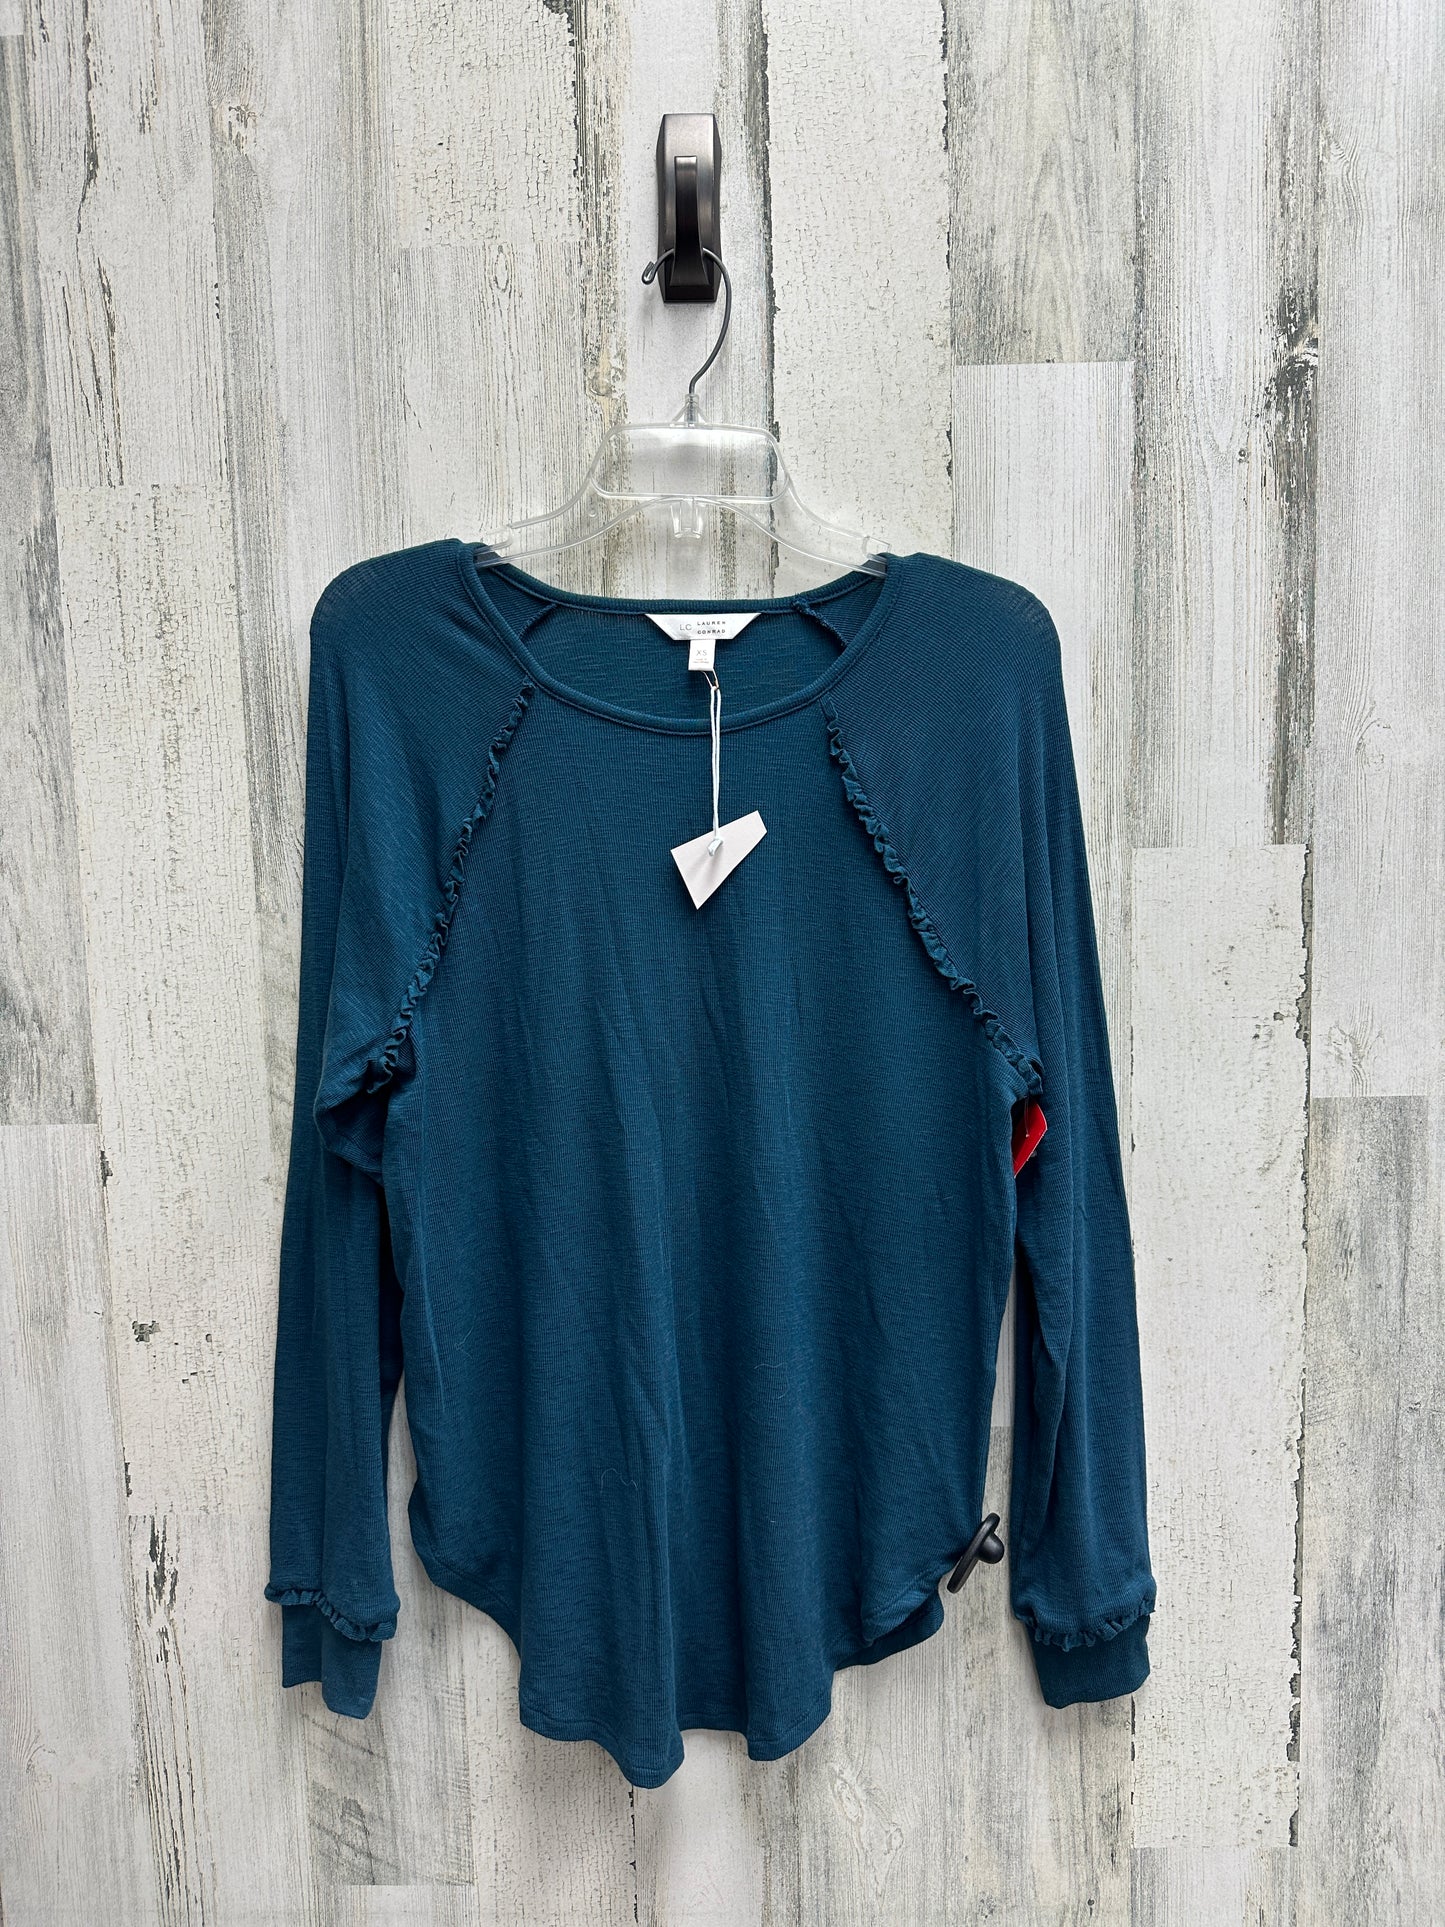 Top Long Sleeve By Lc Lauren Conrad  Size: Xs